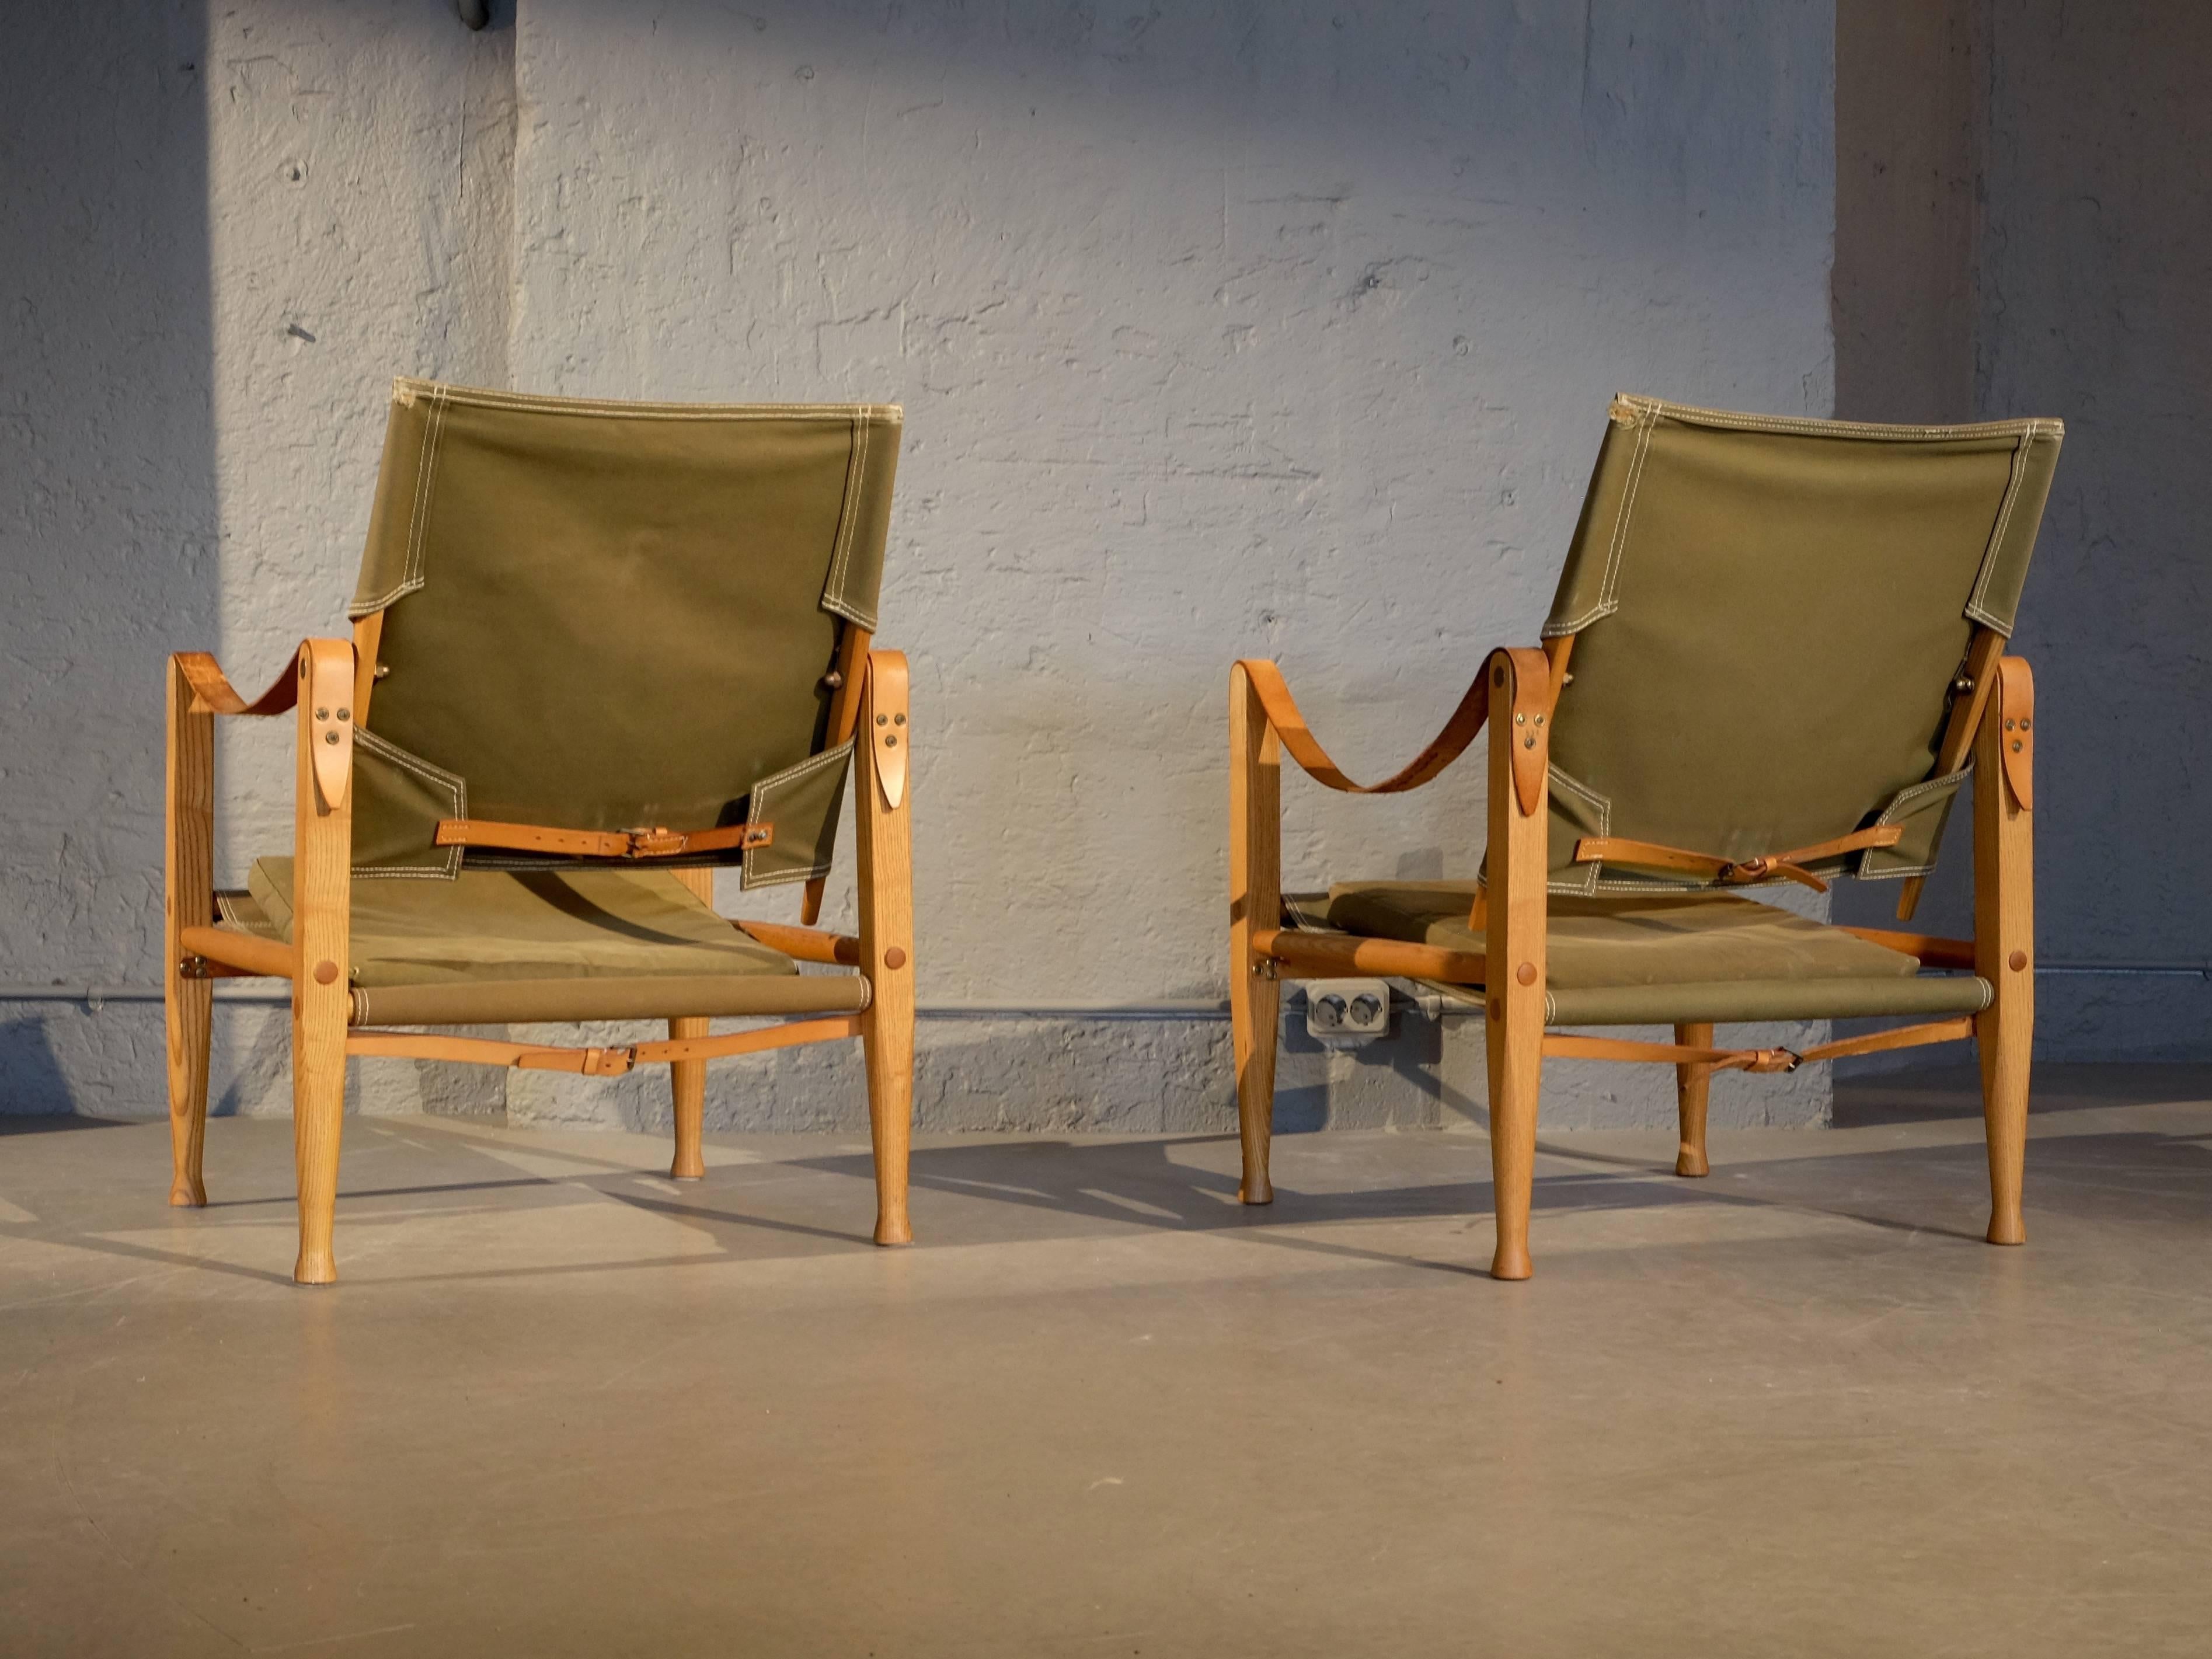 Military green Safari chairs with patinated cognac brown leather. Designed by Kaare Klint in 1933, produced by Rud. Rasmussen, Denmark, 1960s.